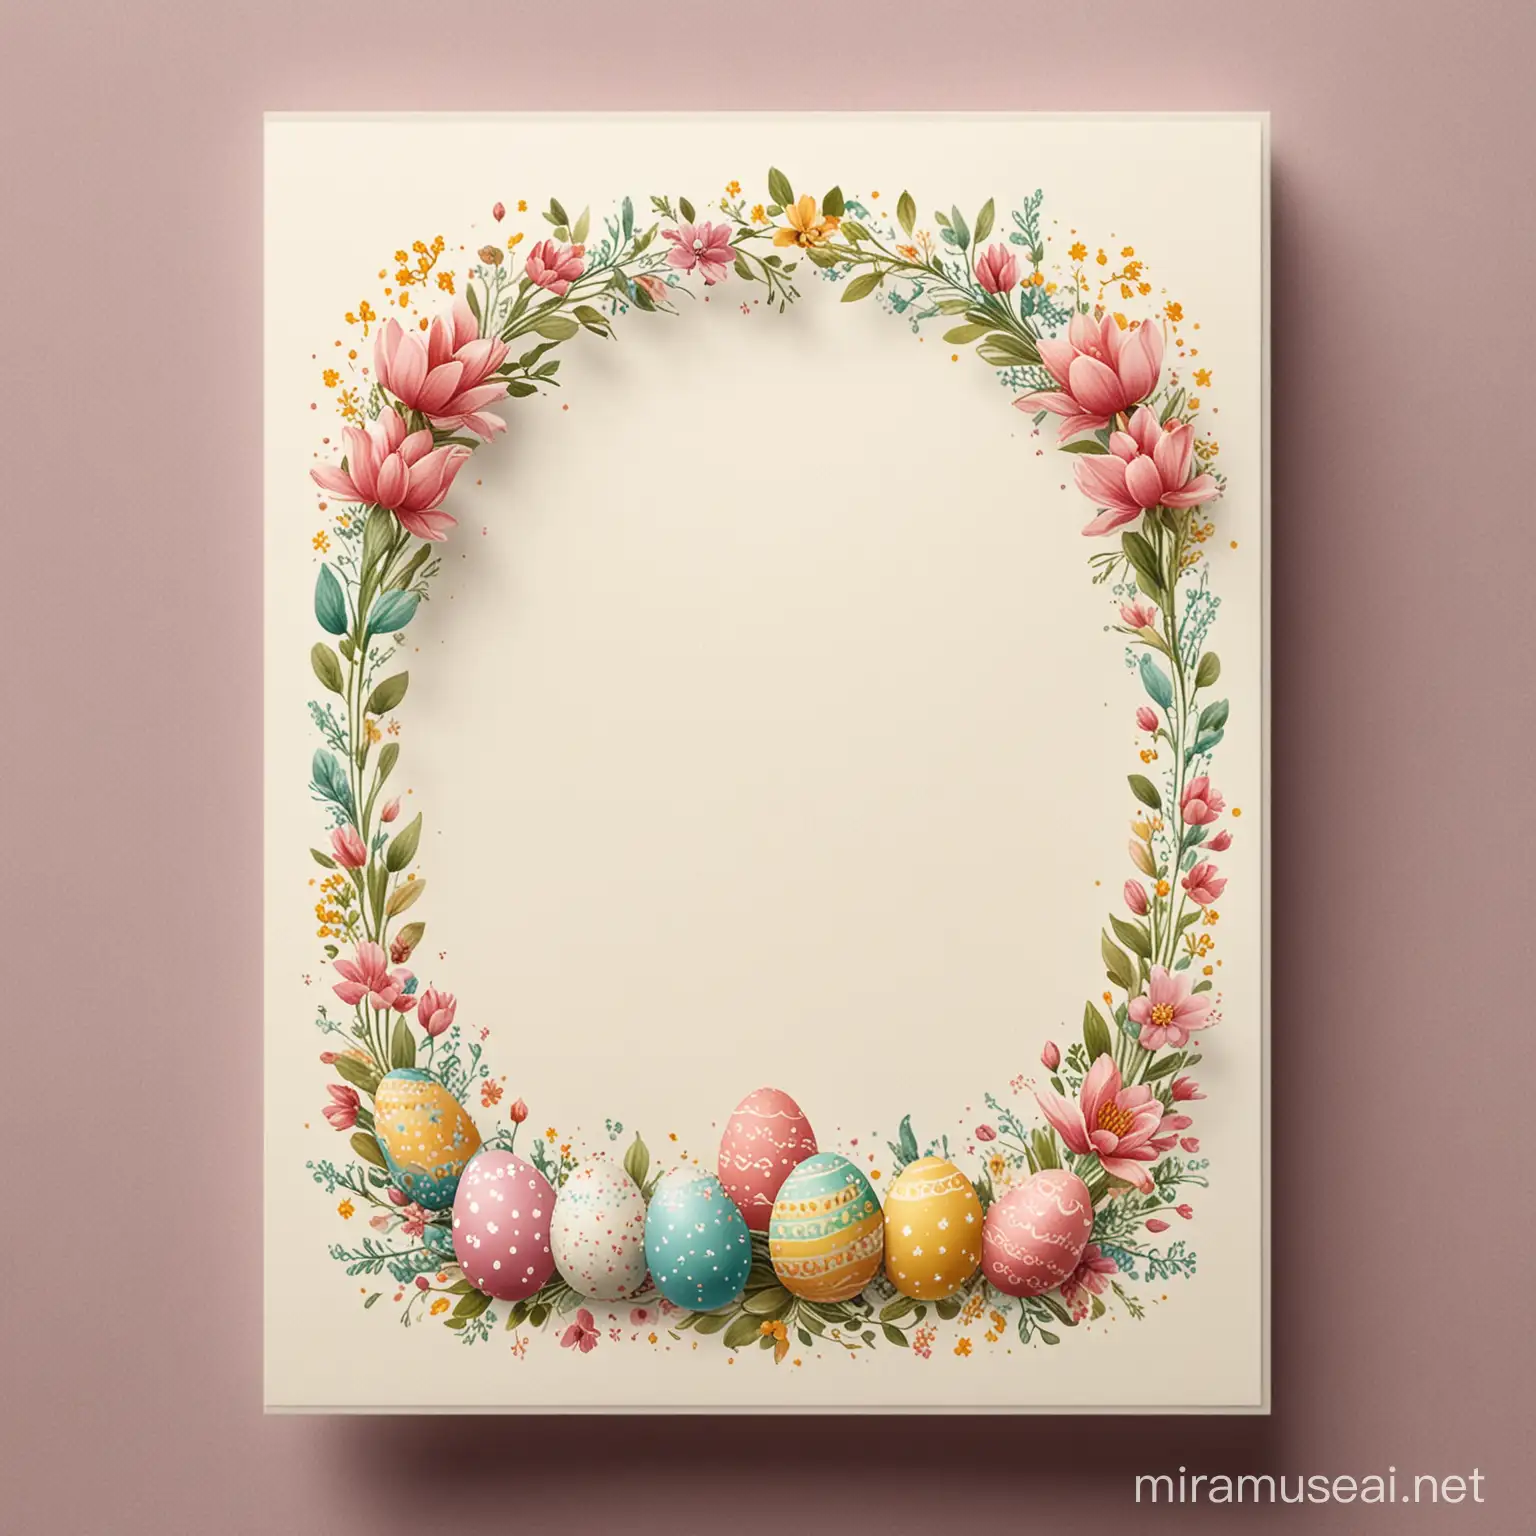 Colorful Easter Egg Card with Space for Personal Wishes